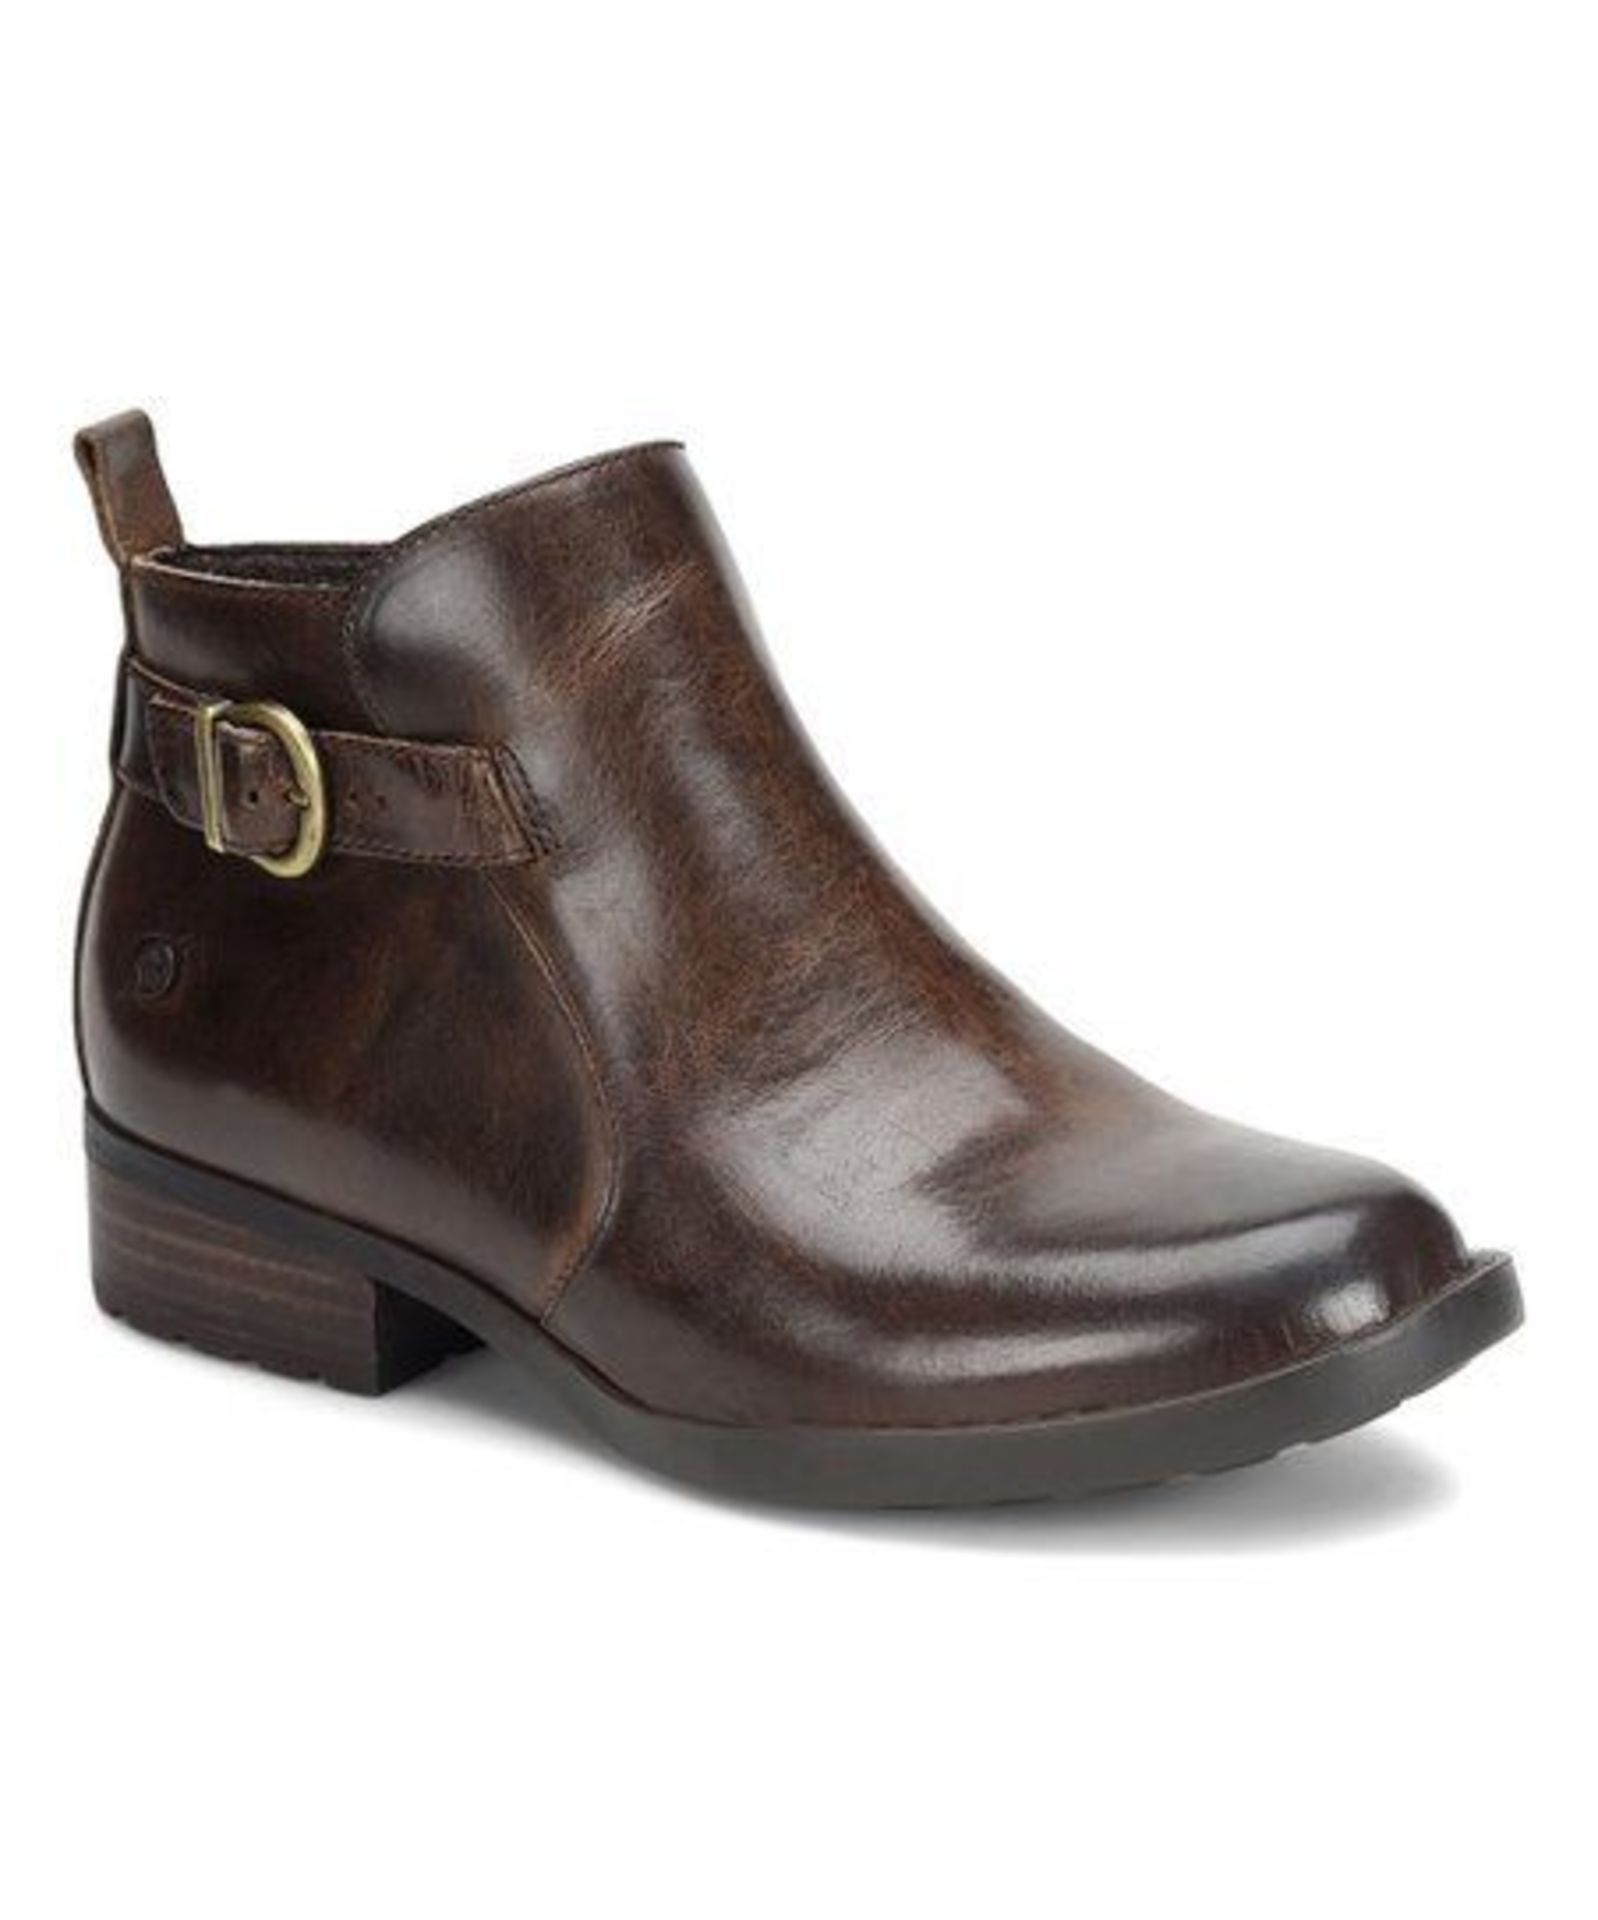 Børn Brown Timms Leather Bootie (Uk Size:7.5/Us Size:10) (New With Box) [Ref: 55334204-K-004] - Image 2 of 5